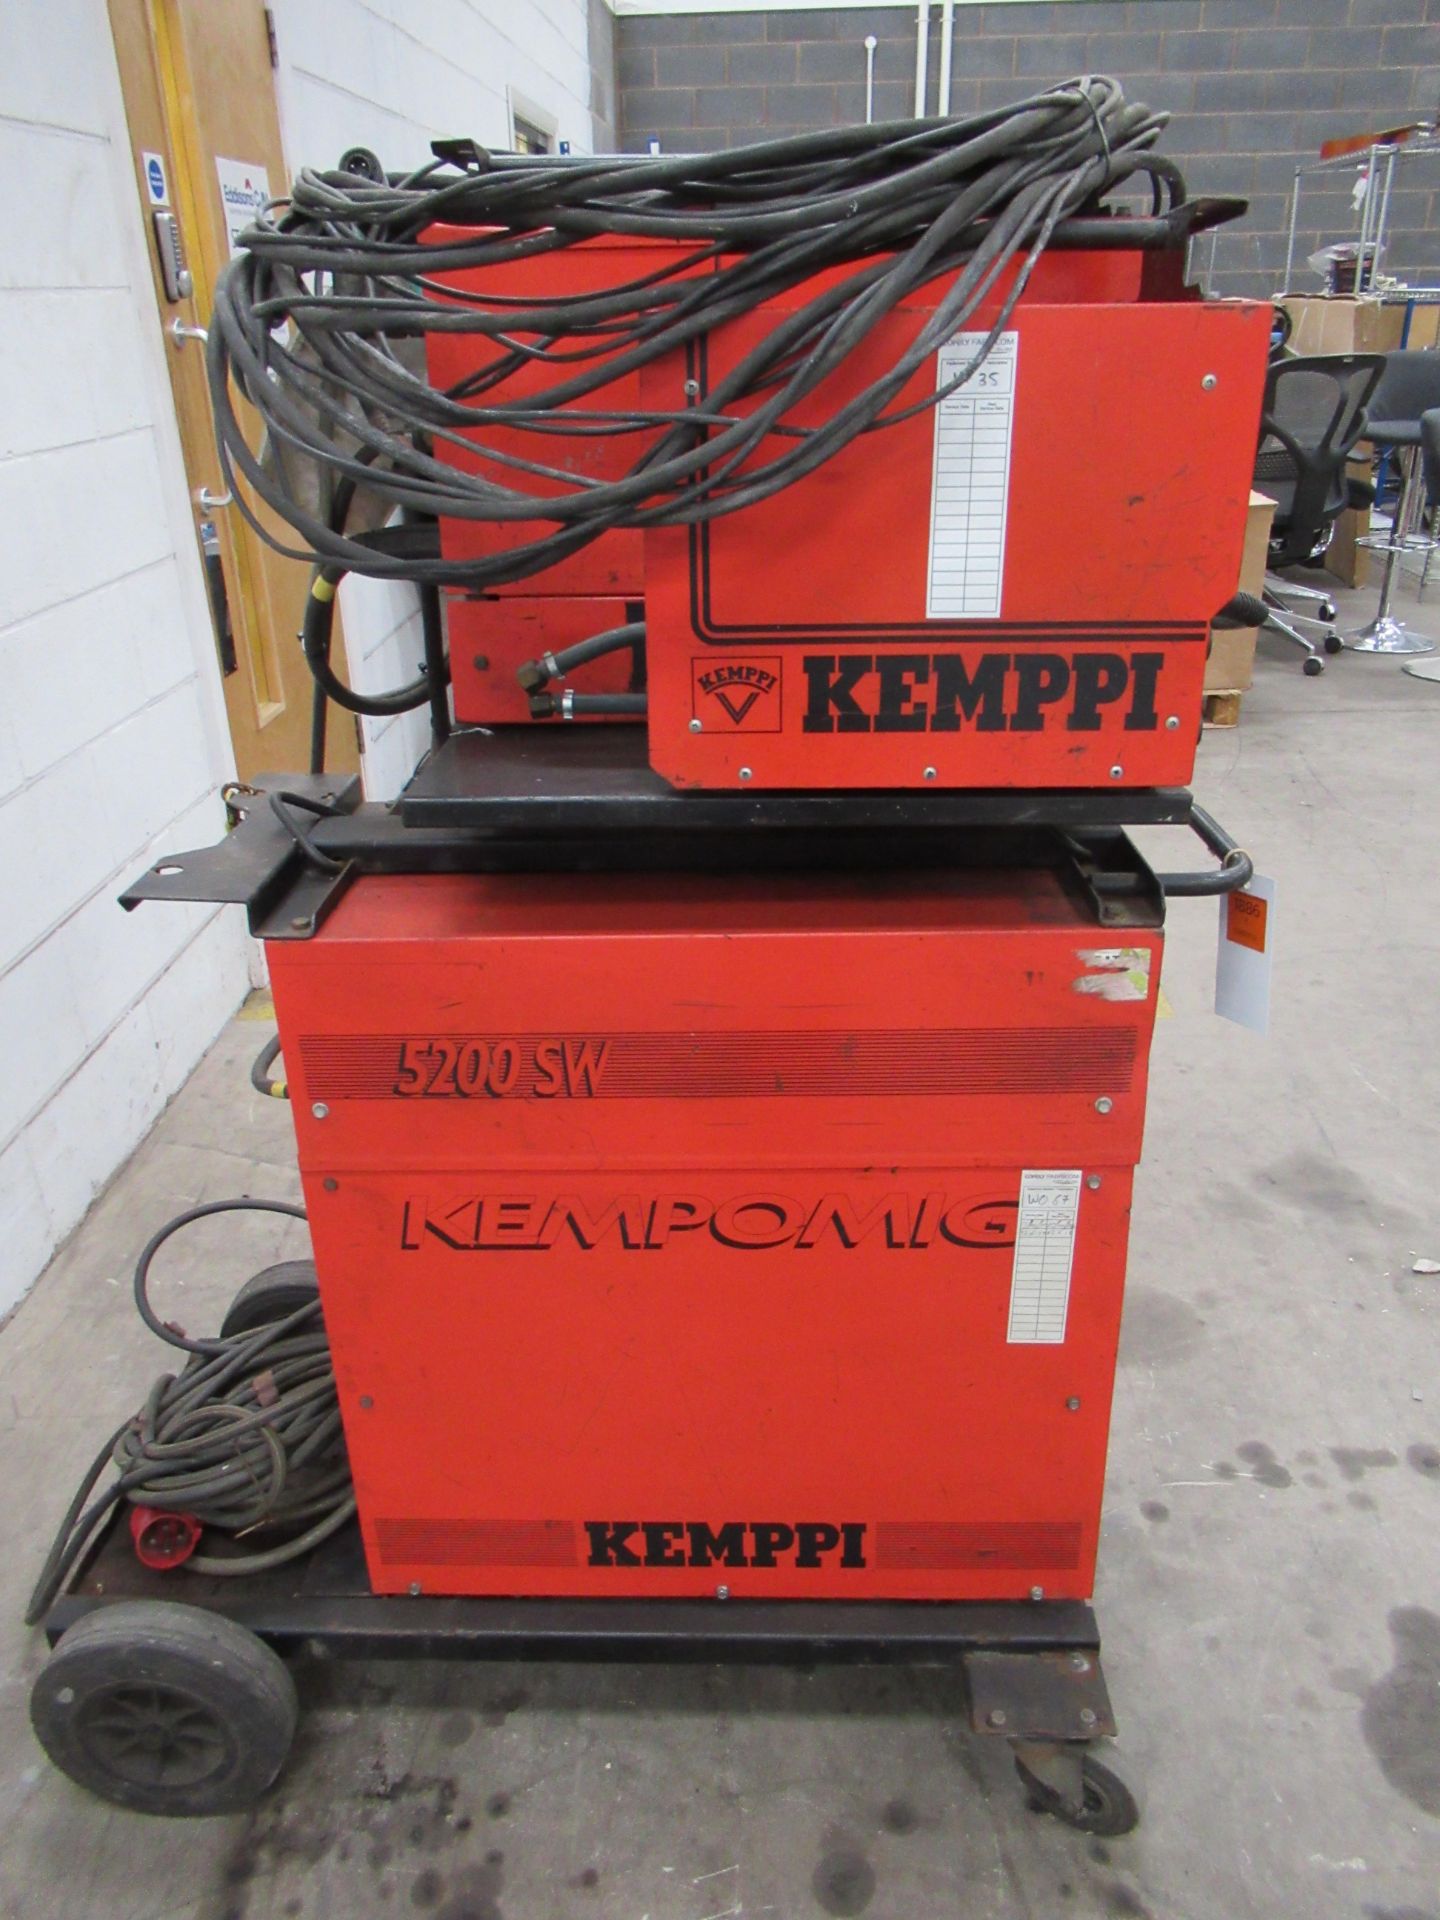 Kemppi Kempomig 5200 SW welder with Kemppi Fuzo wire feed and Kemppi TU50 controller with torch and - Image 3 of 7